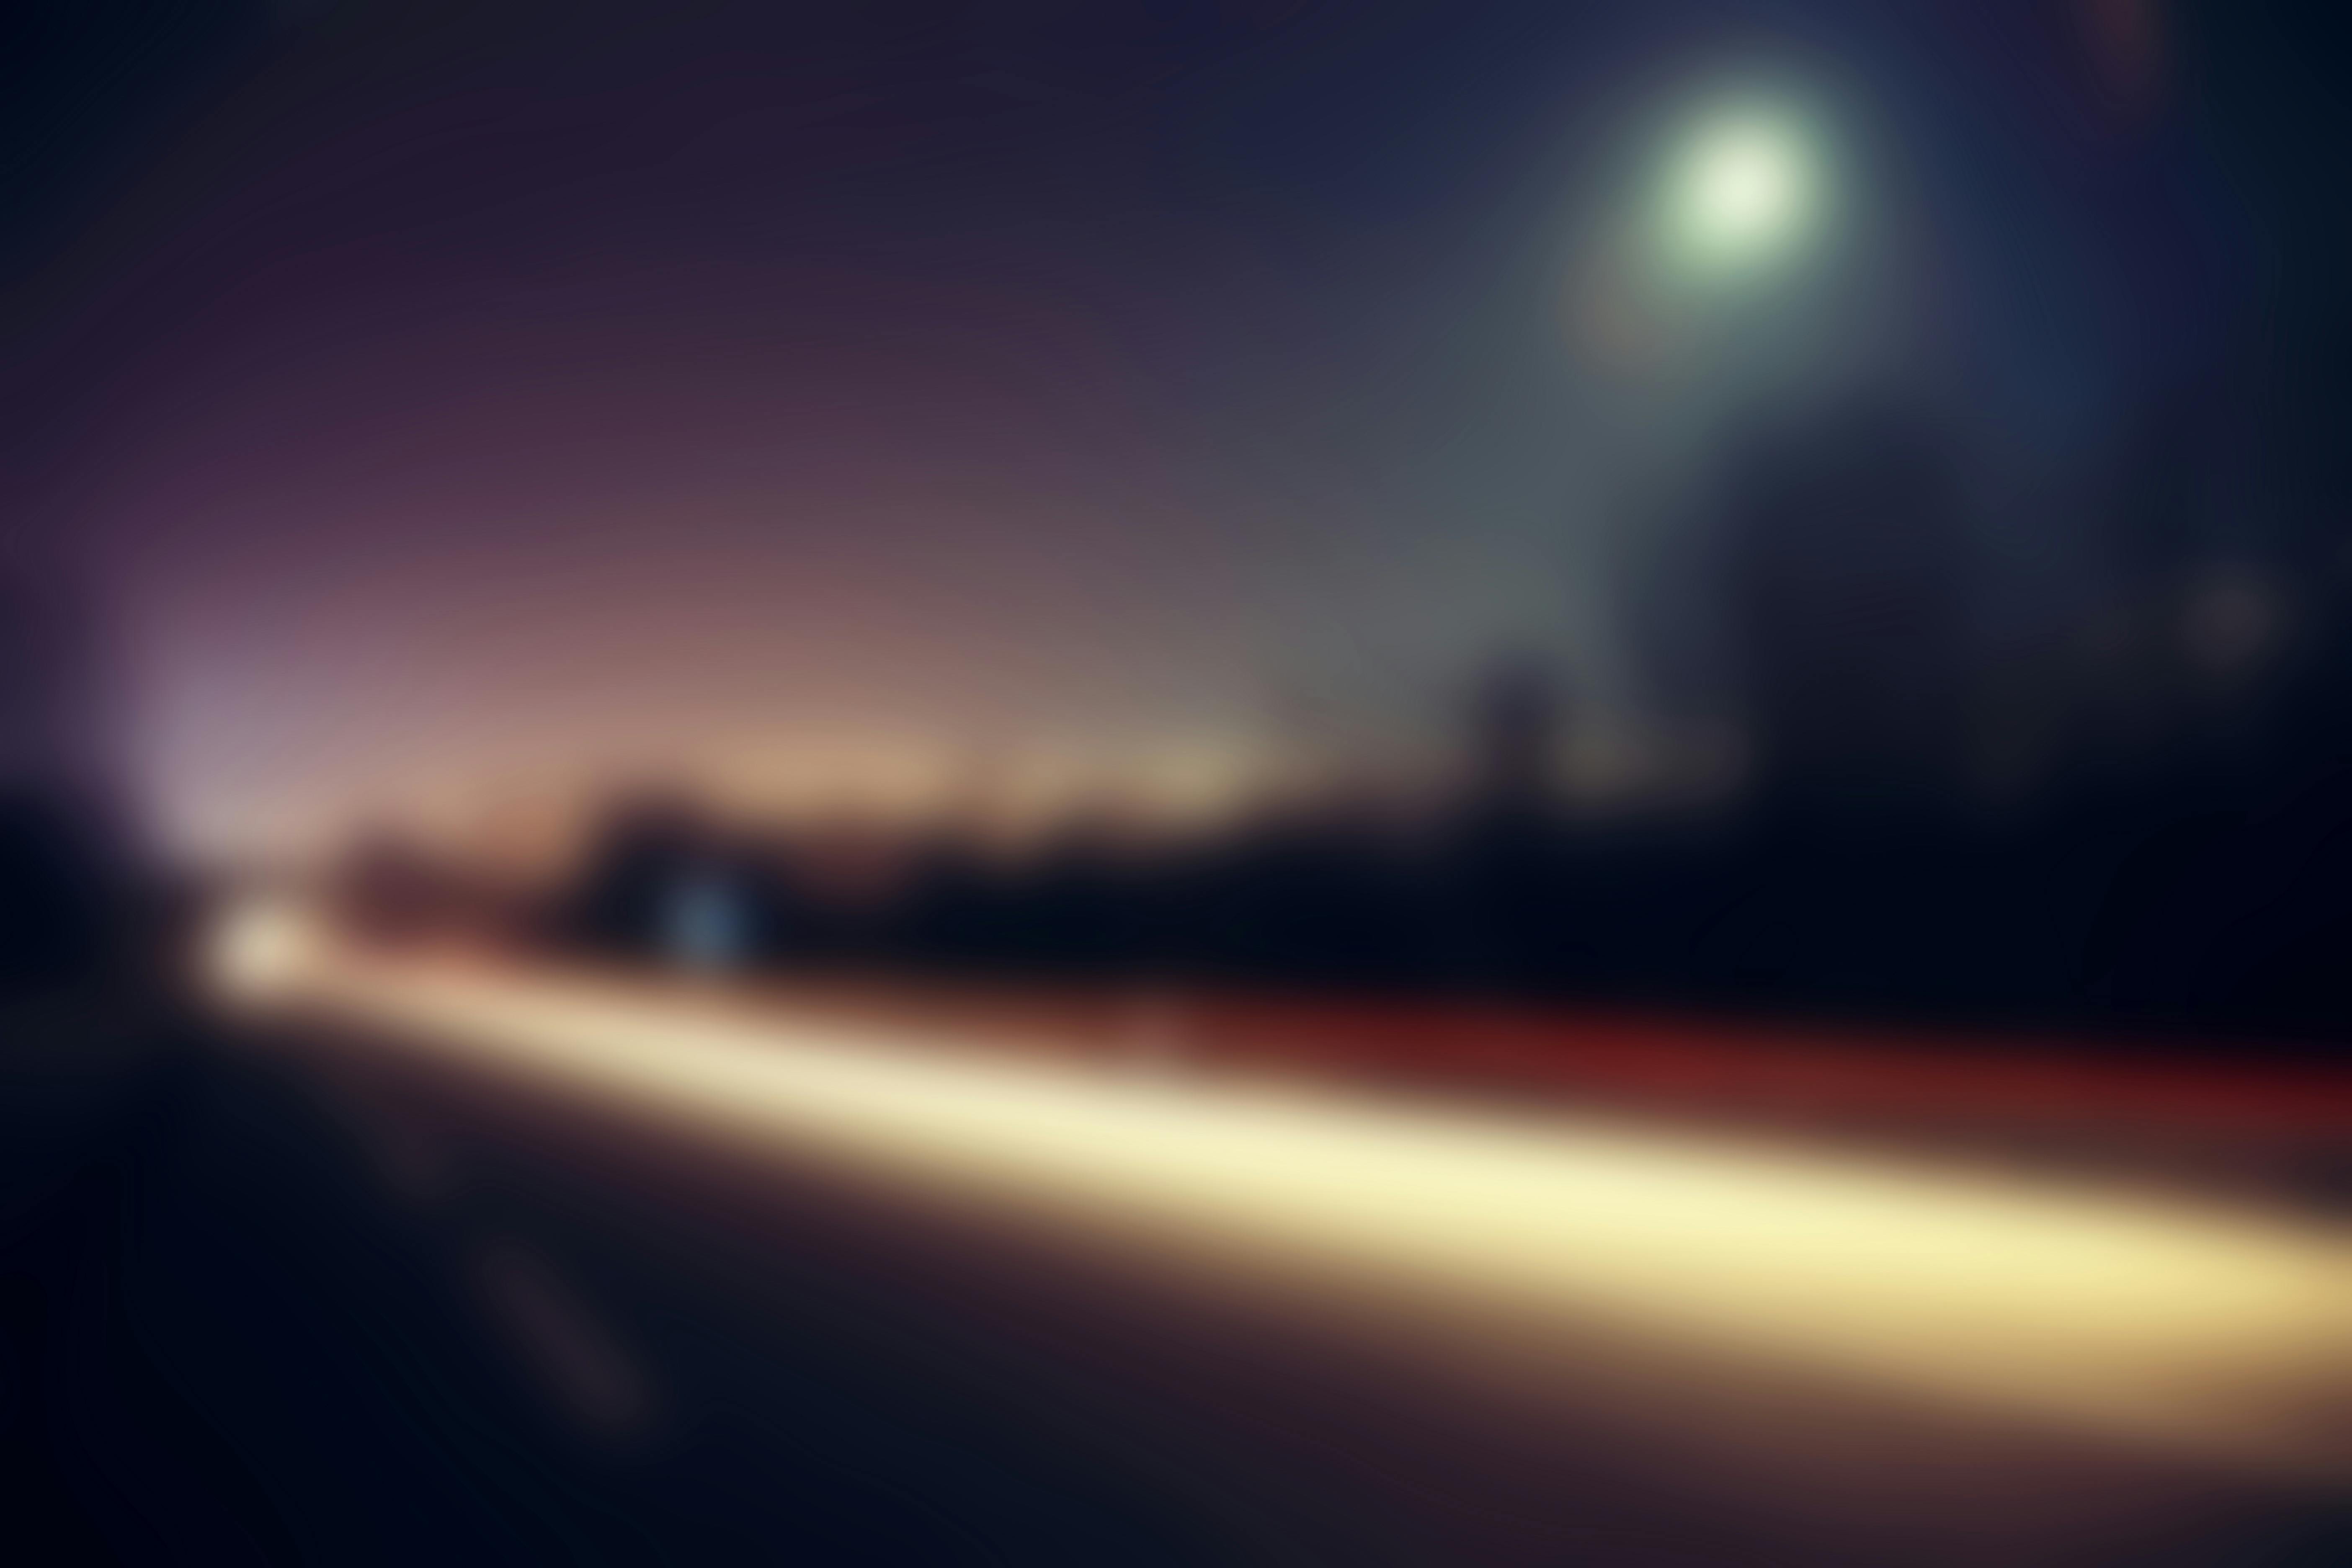  Free stock photo of background blur blurred 